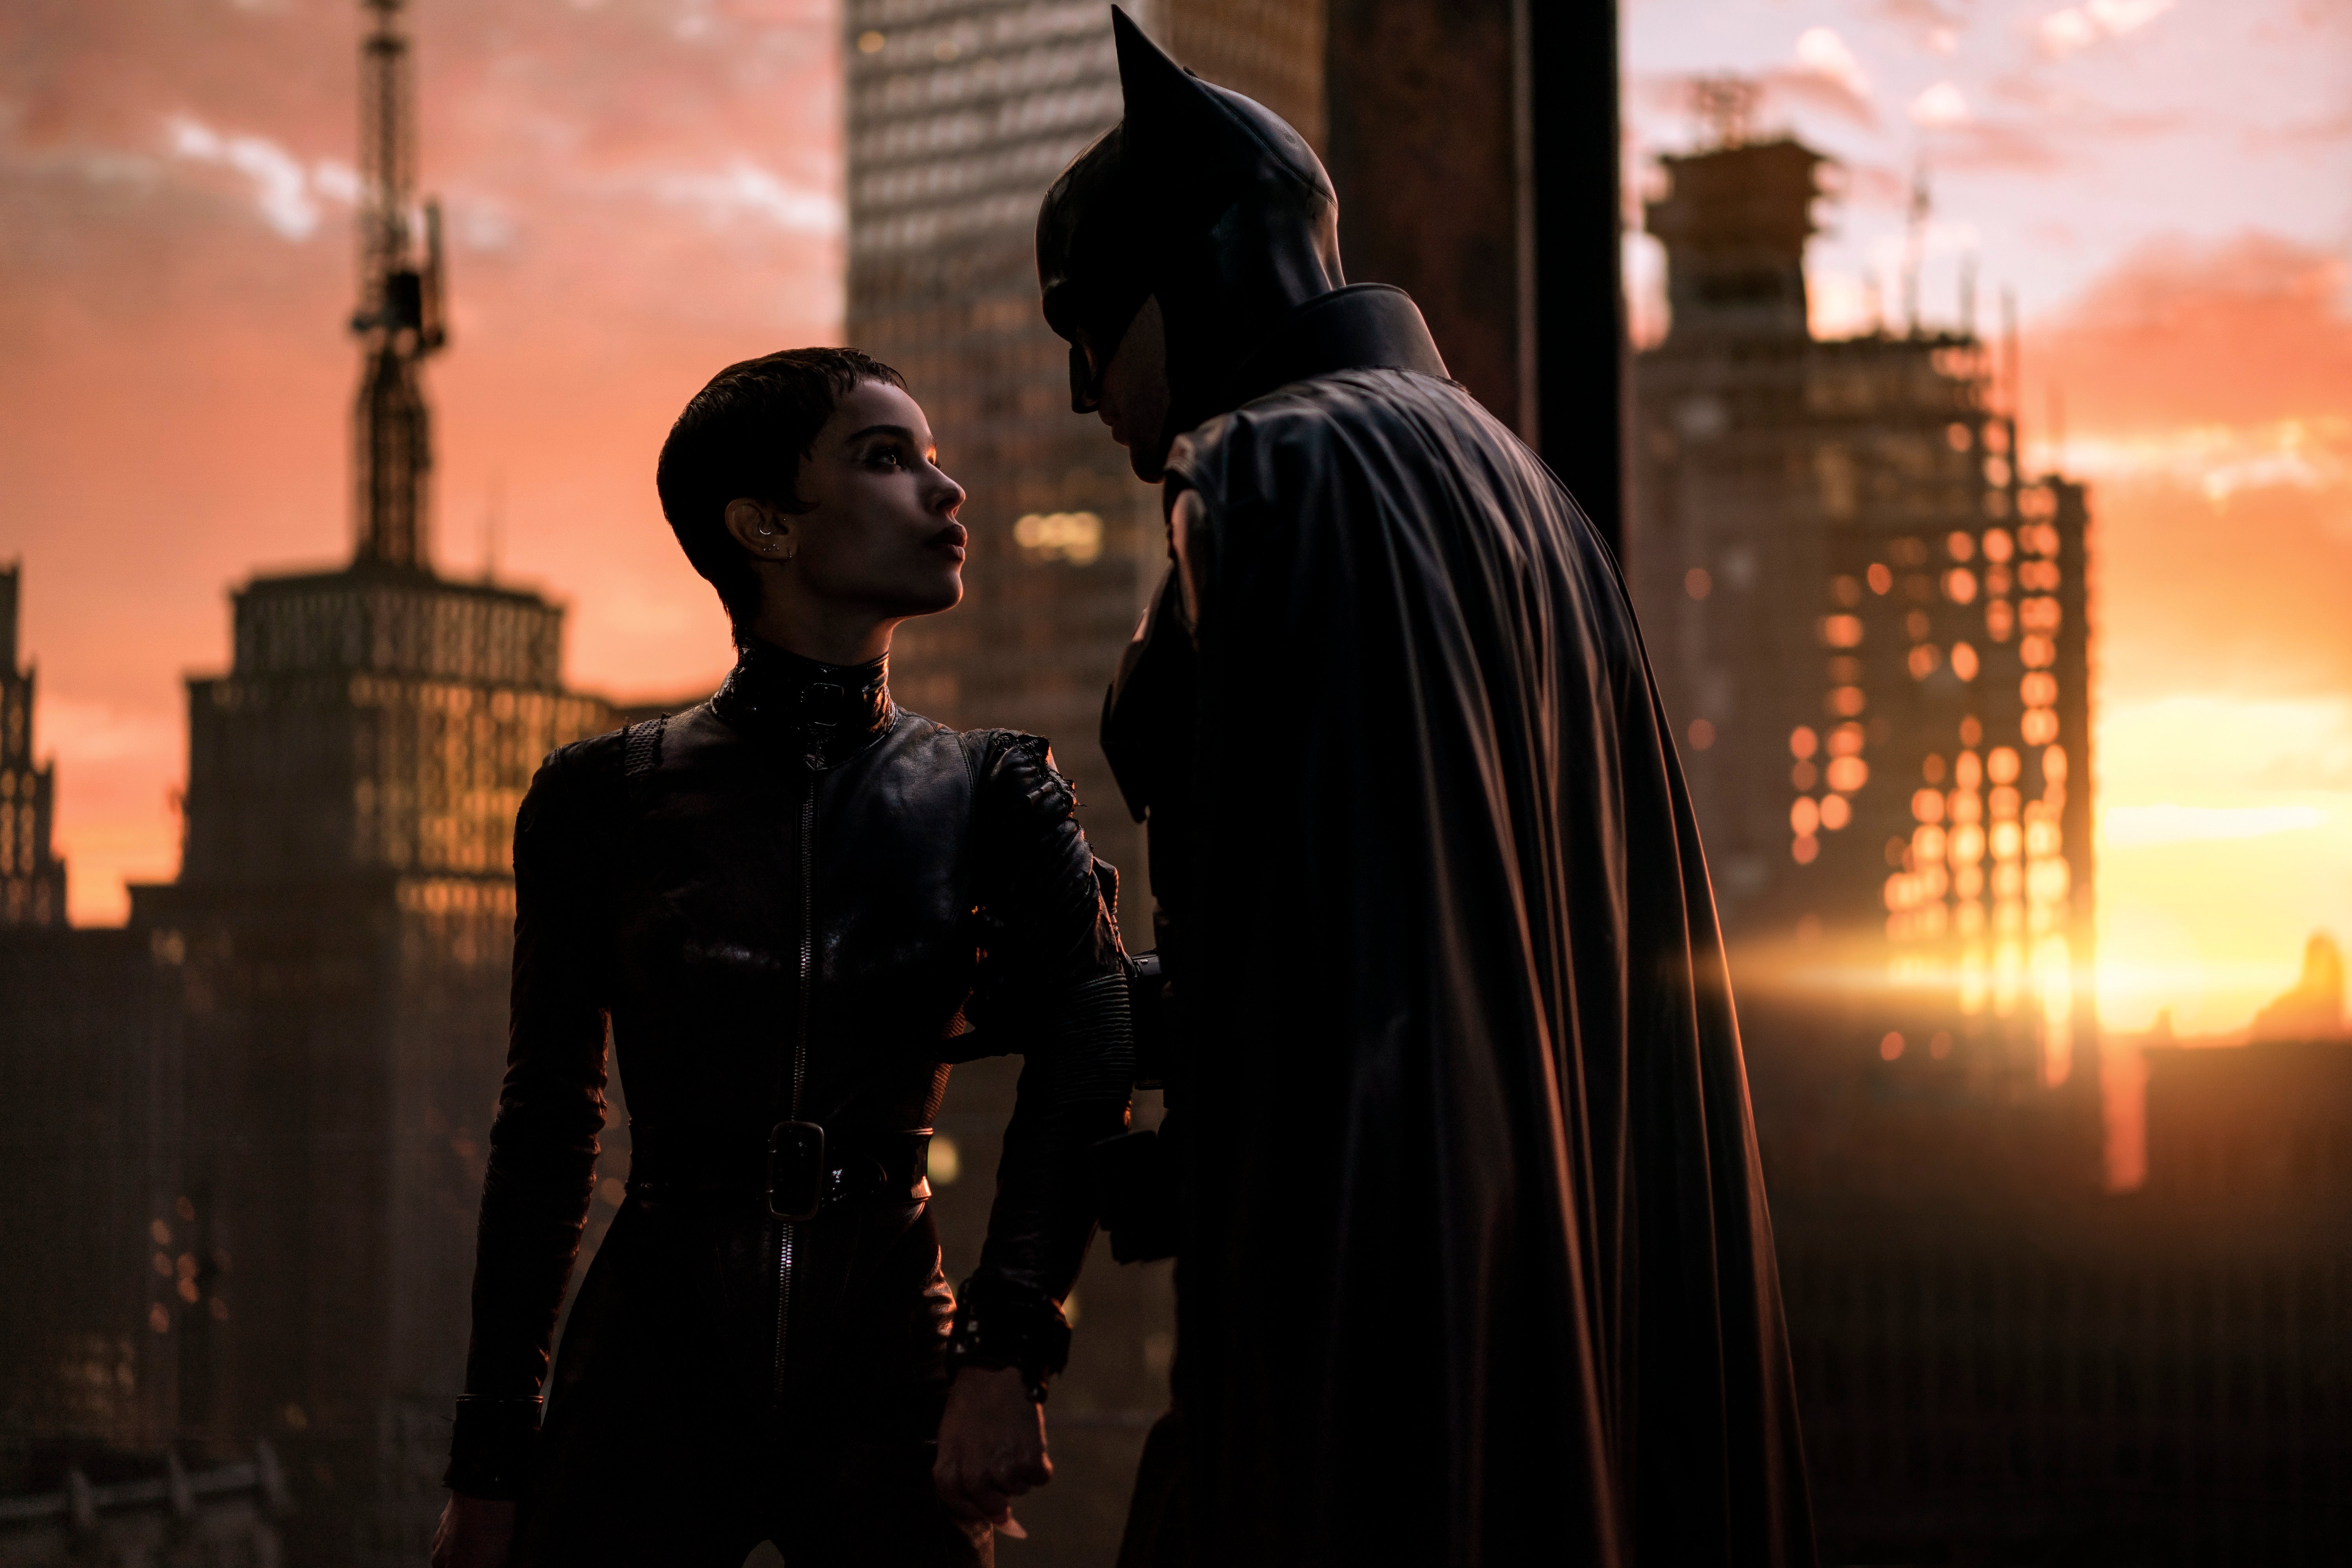 ‘The Batman’ picked up four Bafta nominations